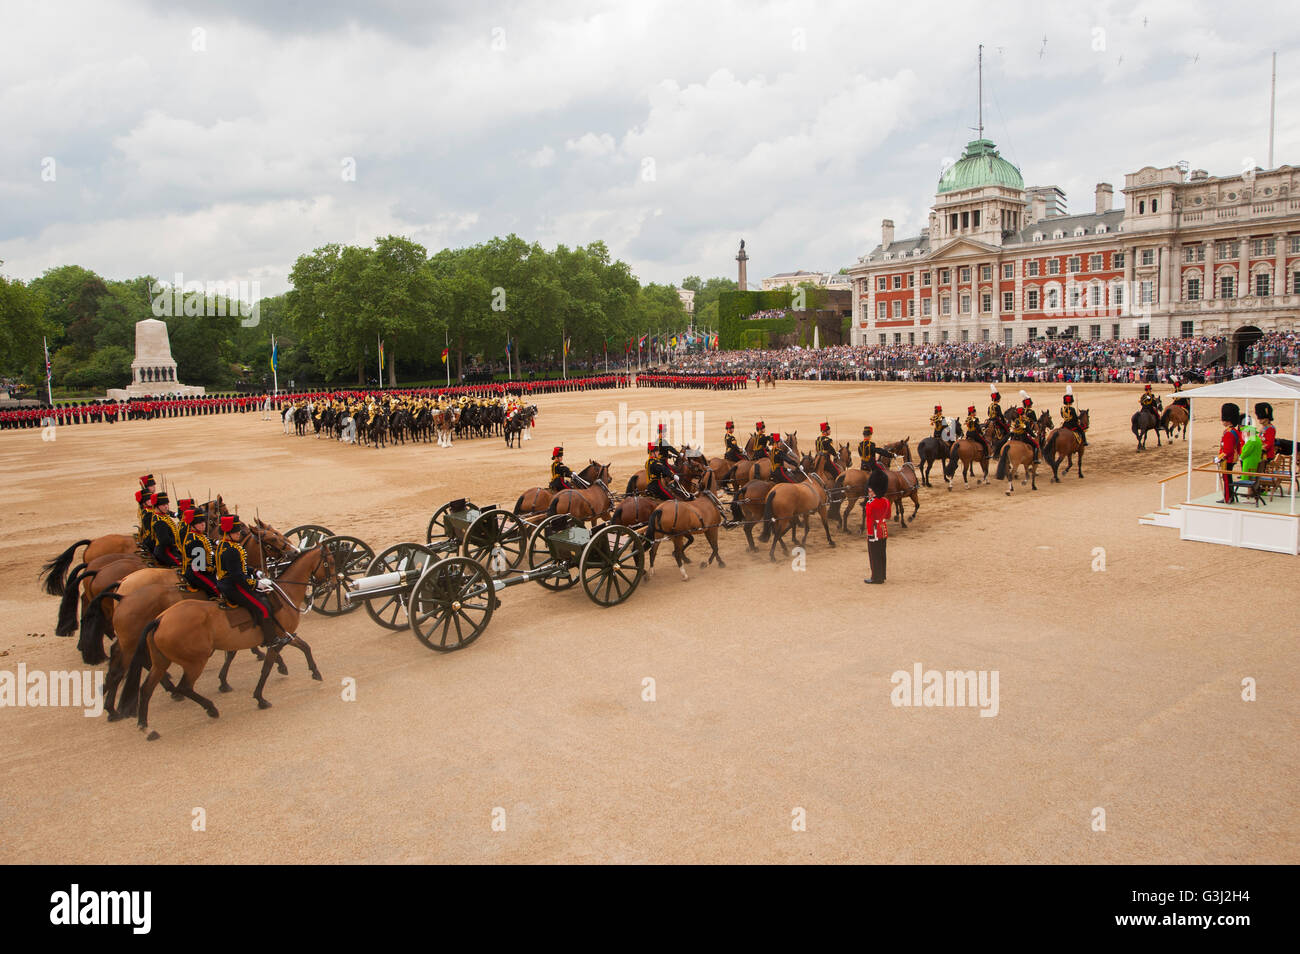 Horse Guards Parade, London, UK. 11th June 2016. 90th birthday parade of HM Queen Elizabeth II. The Ride Past by Royal Horse Artillery. Stock Photo